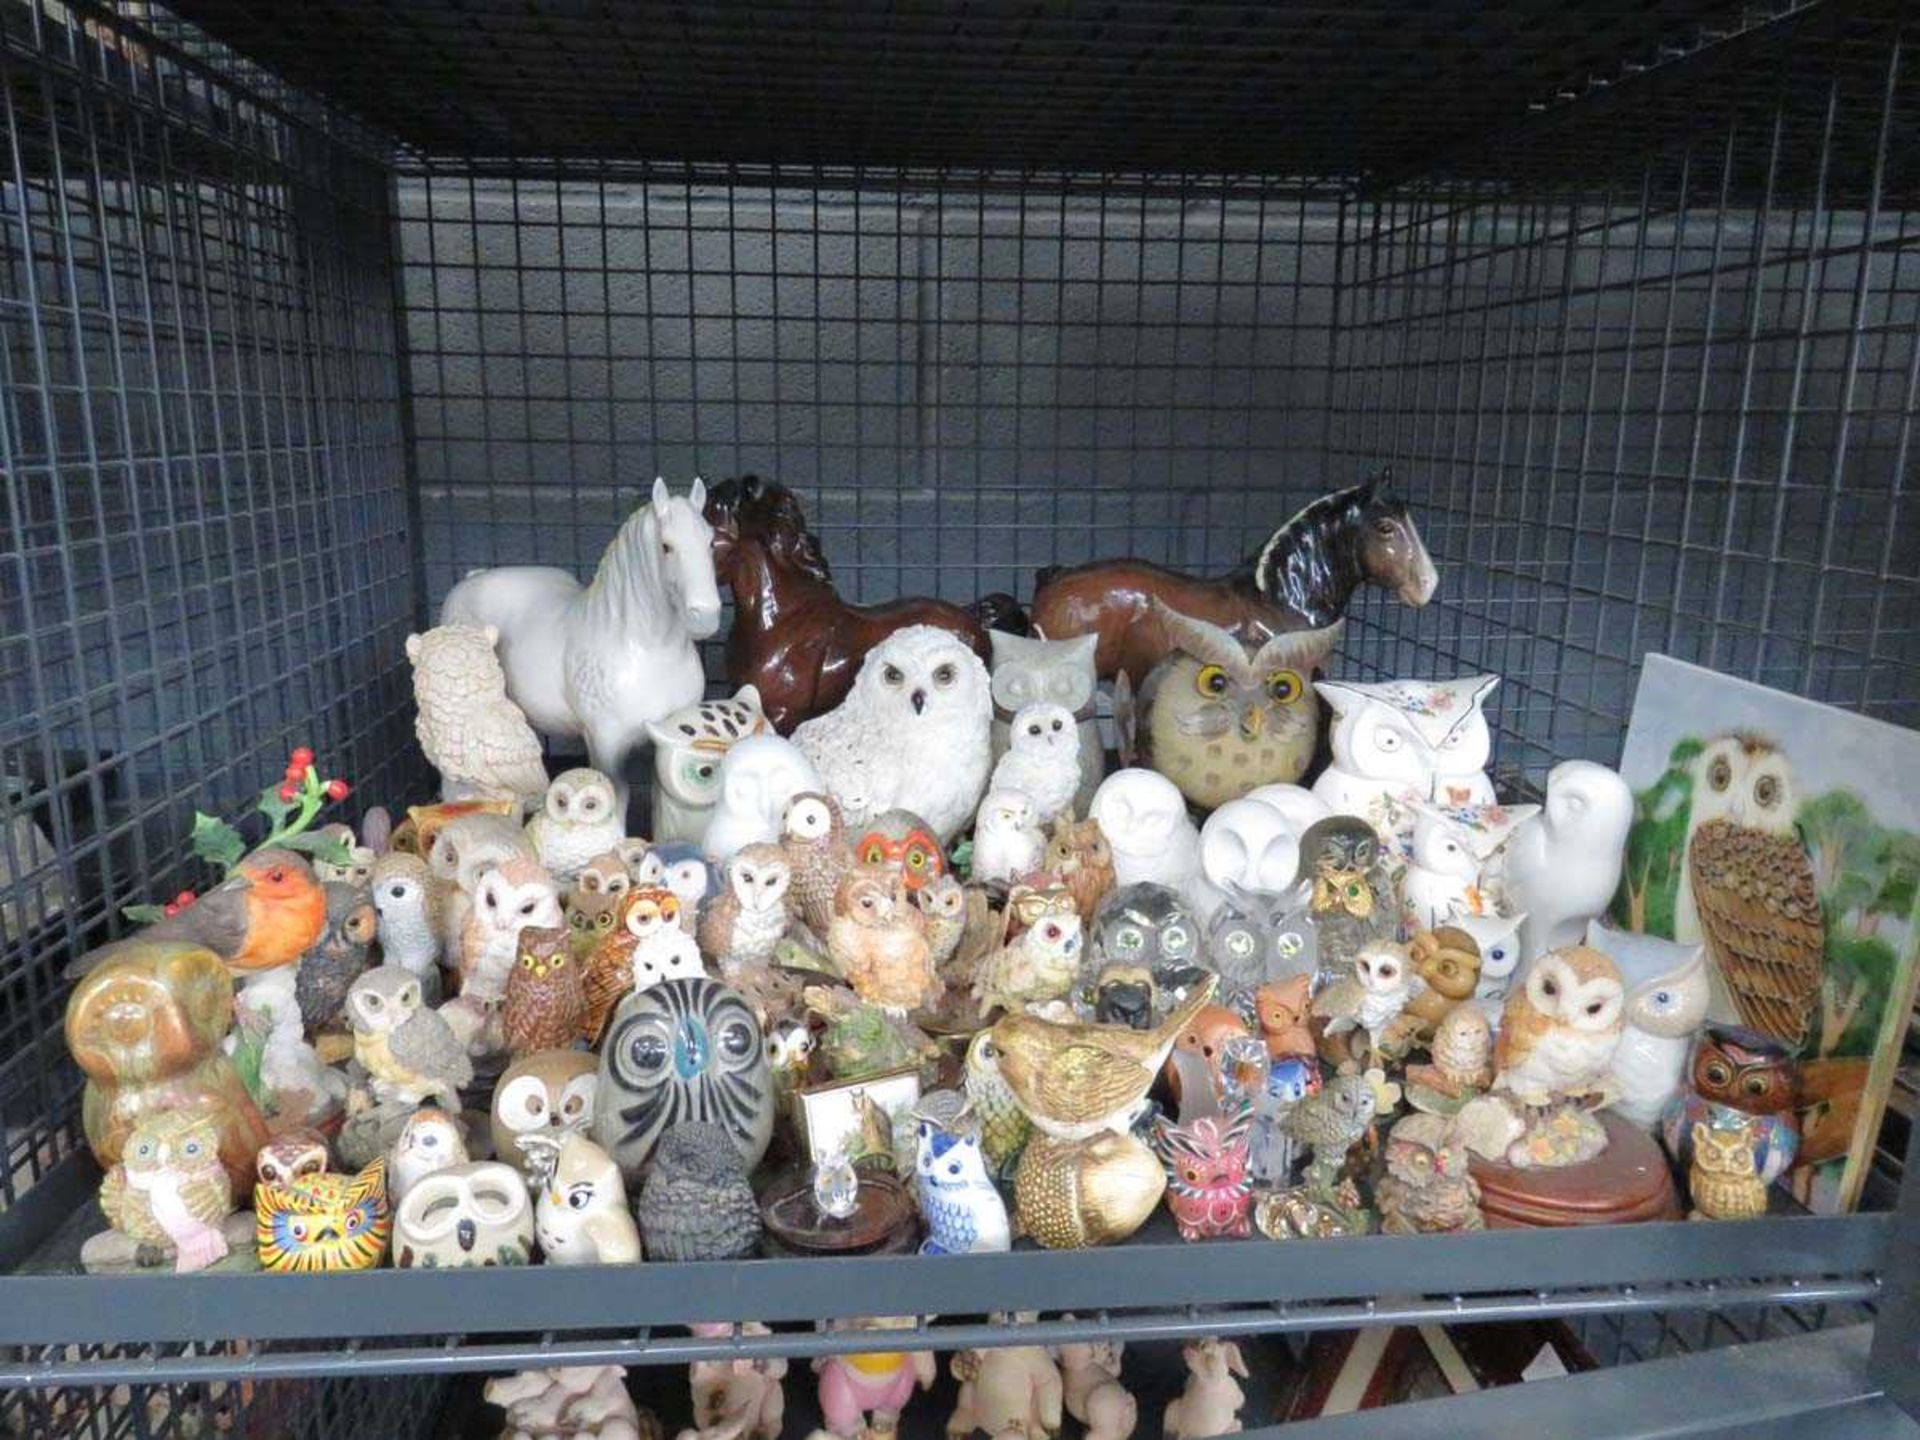 Cage containing large quantity of ornamental owls and horses